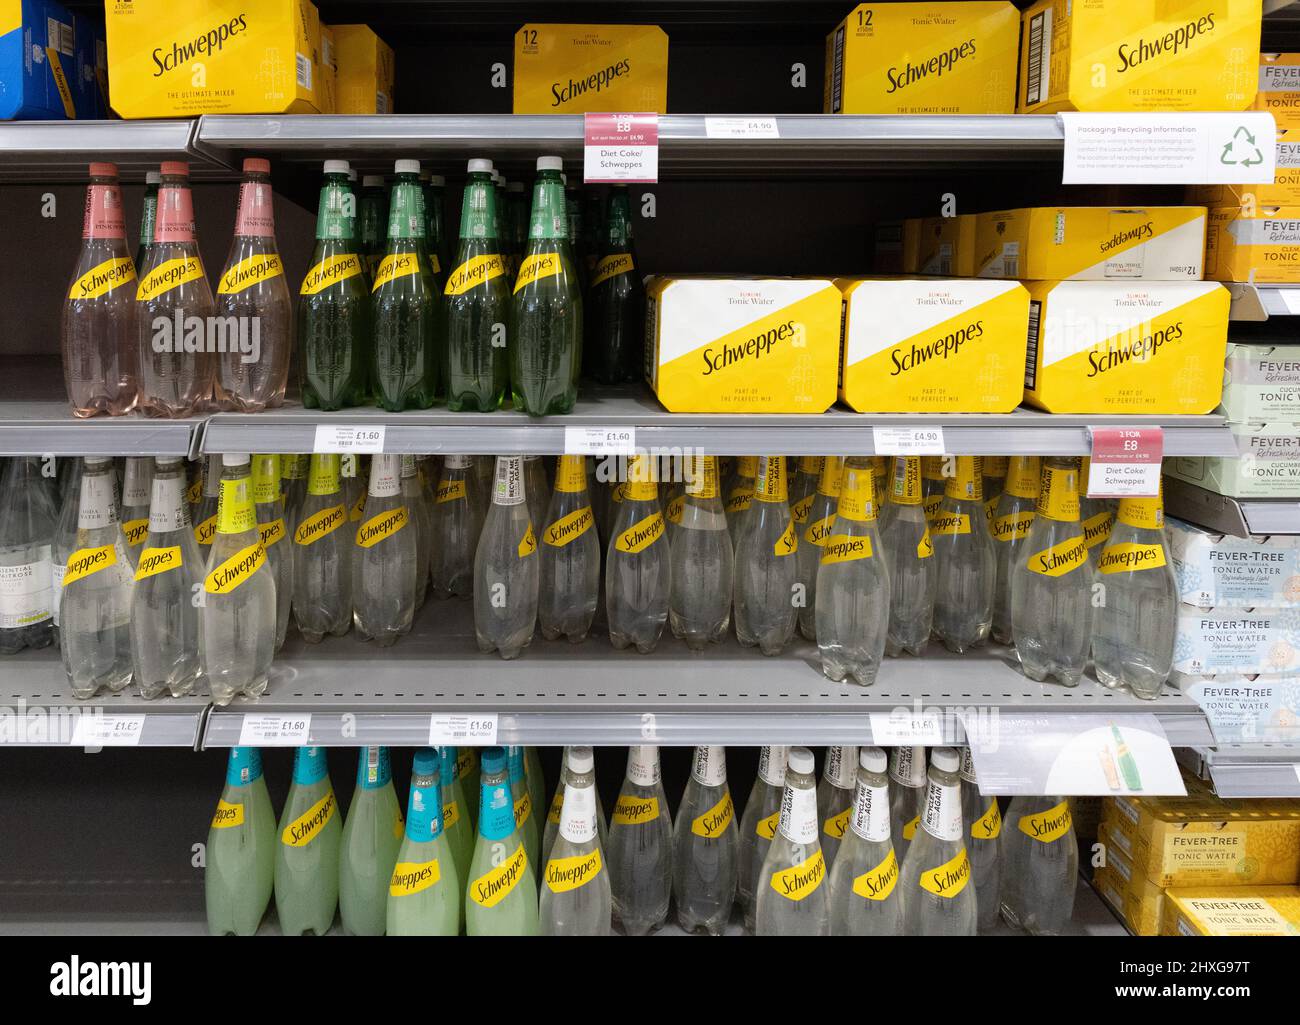 Schweppes Tonic; Bottles and cans of Schweppes tonic water on sale on supermarket shelves, UK Stock Photo